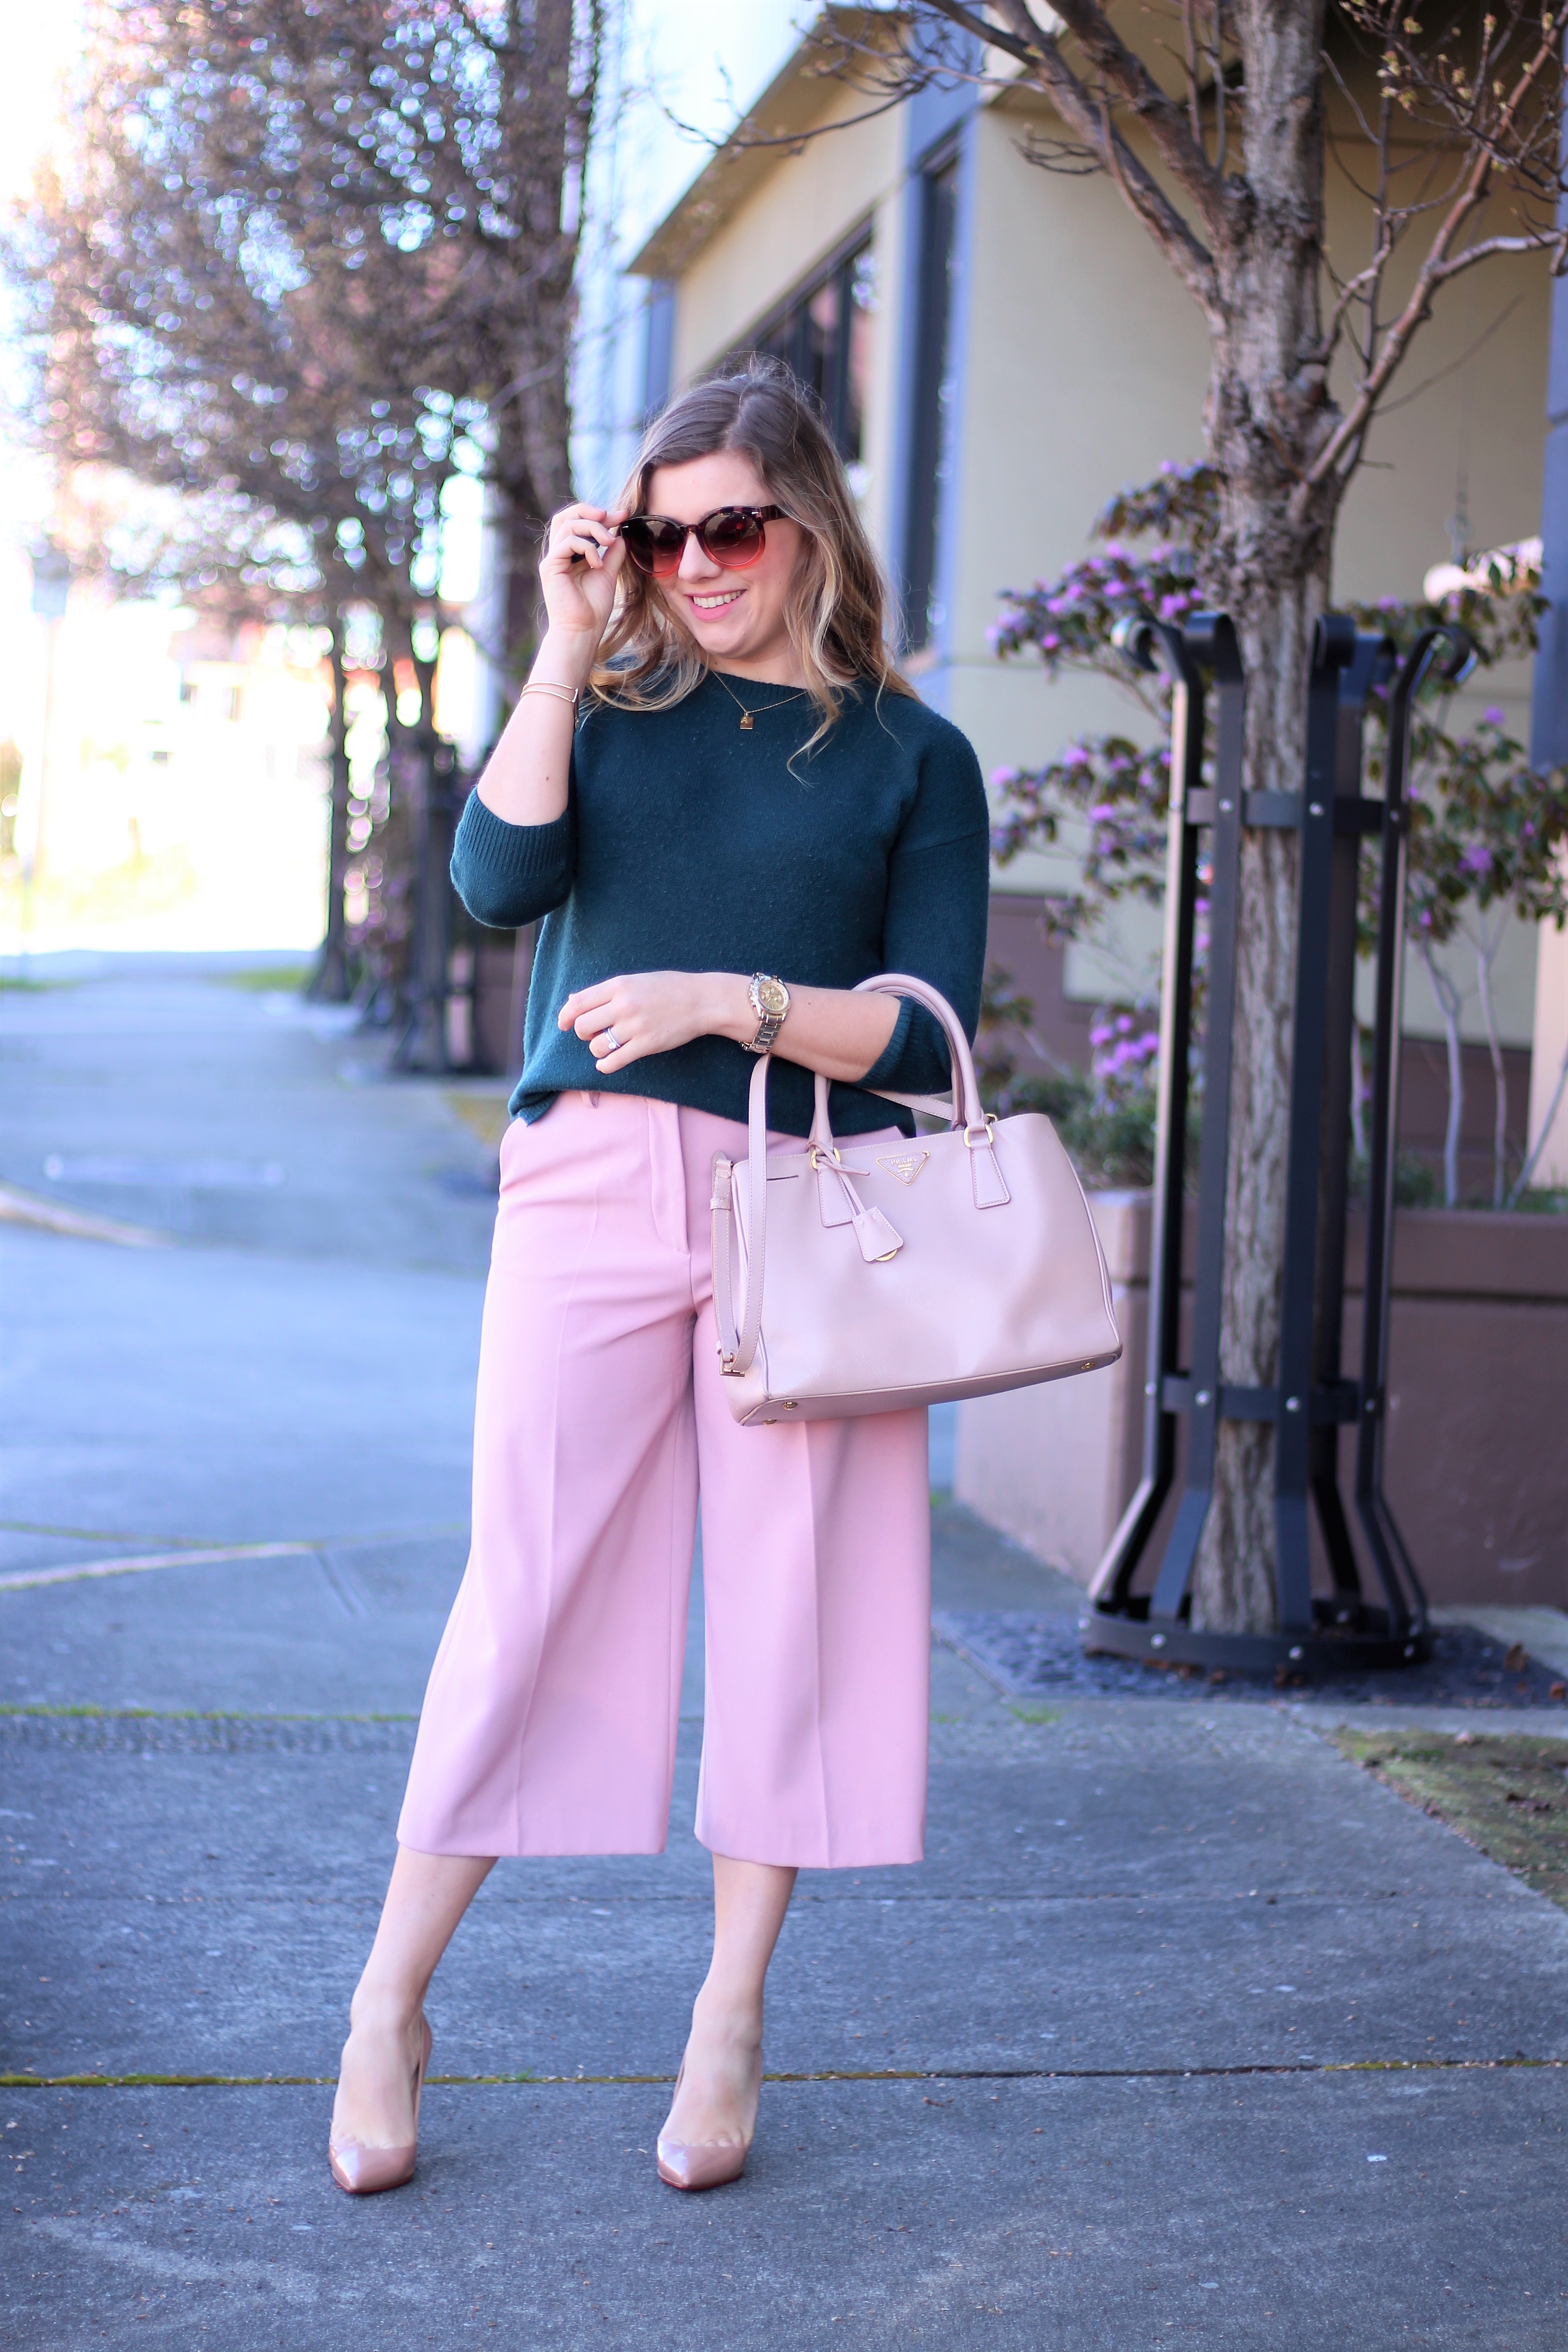 green and pink - easy spring work outfit - fun spring work wear - office spring style